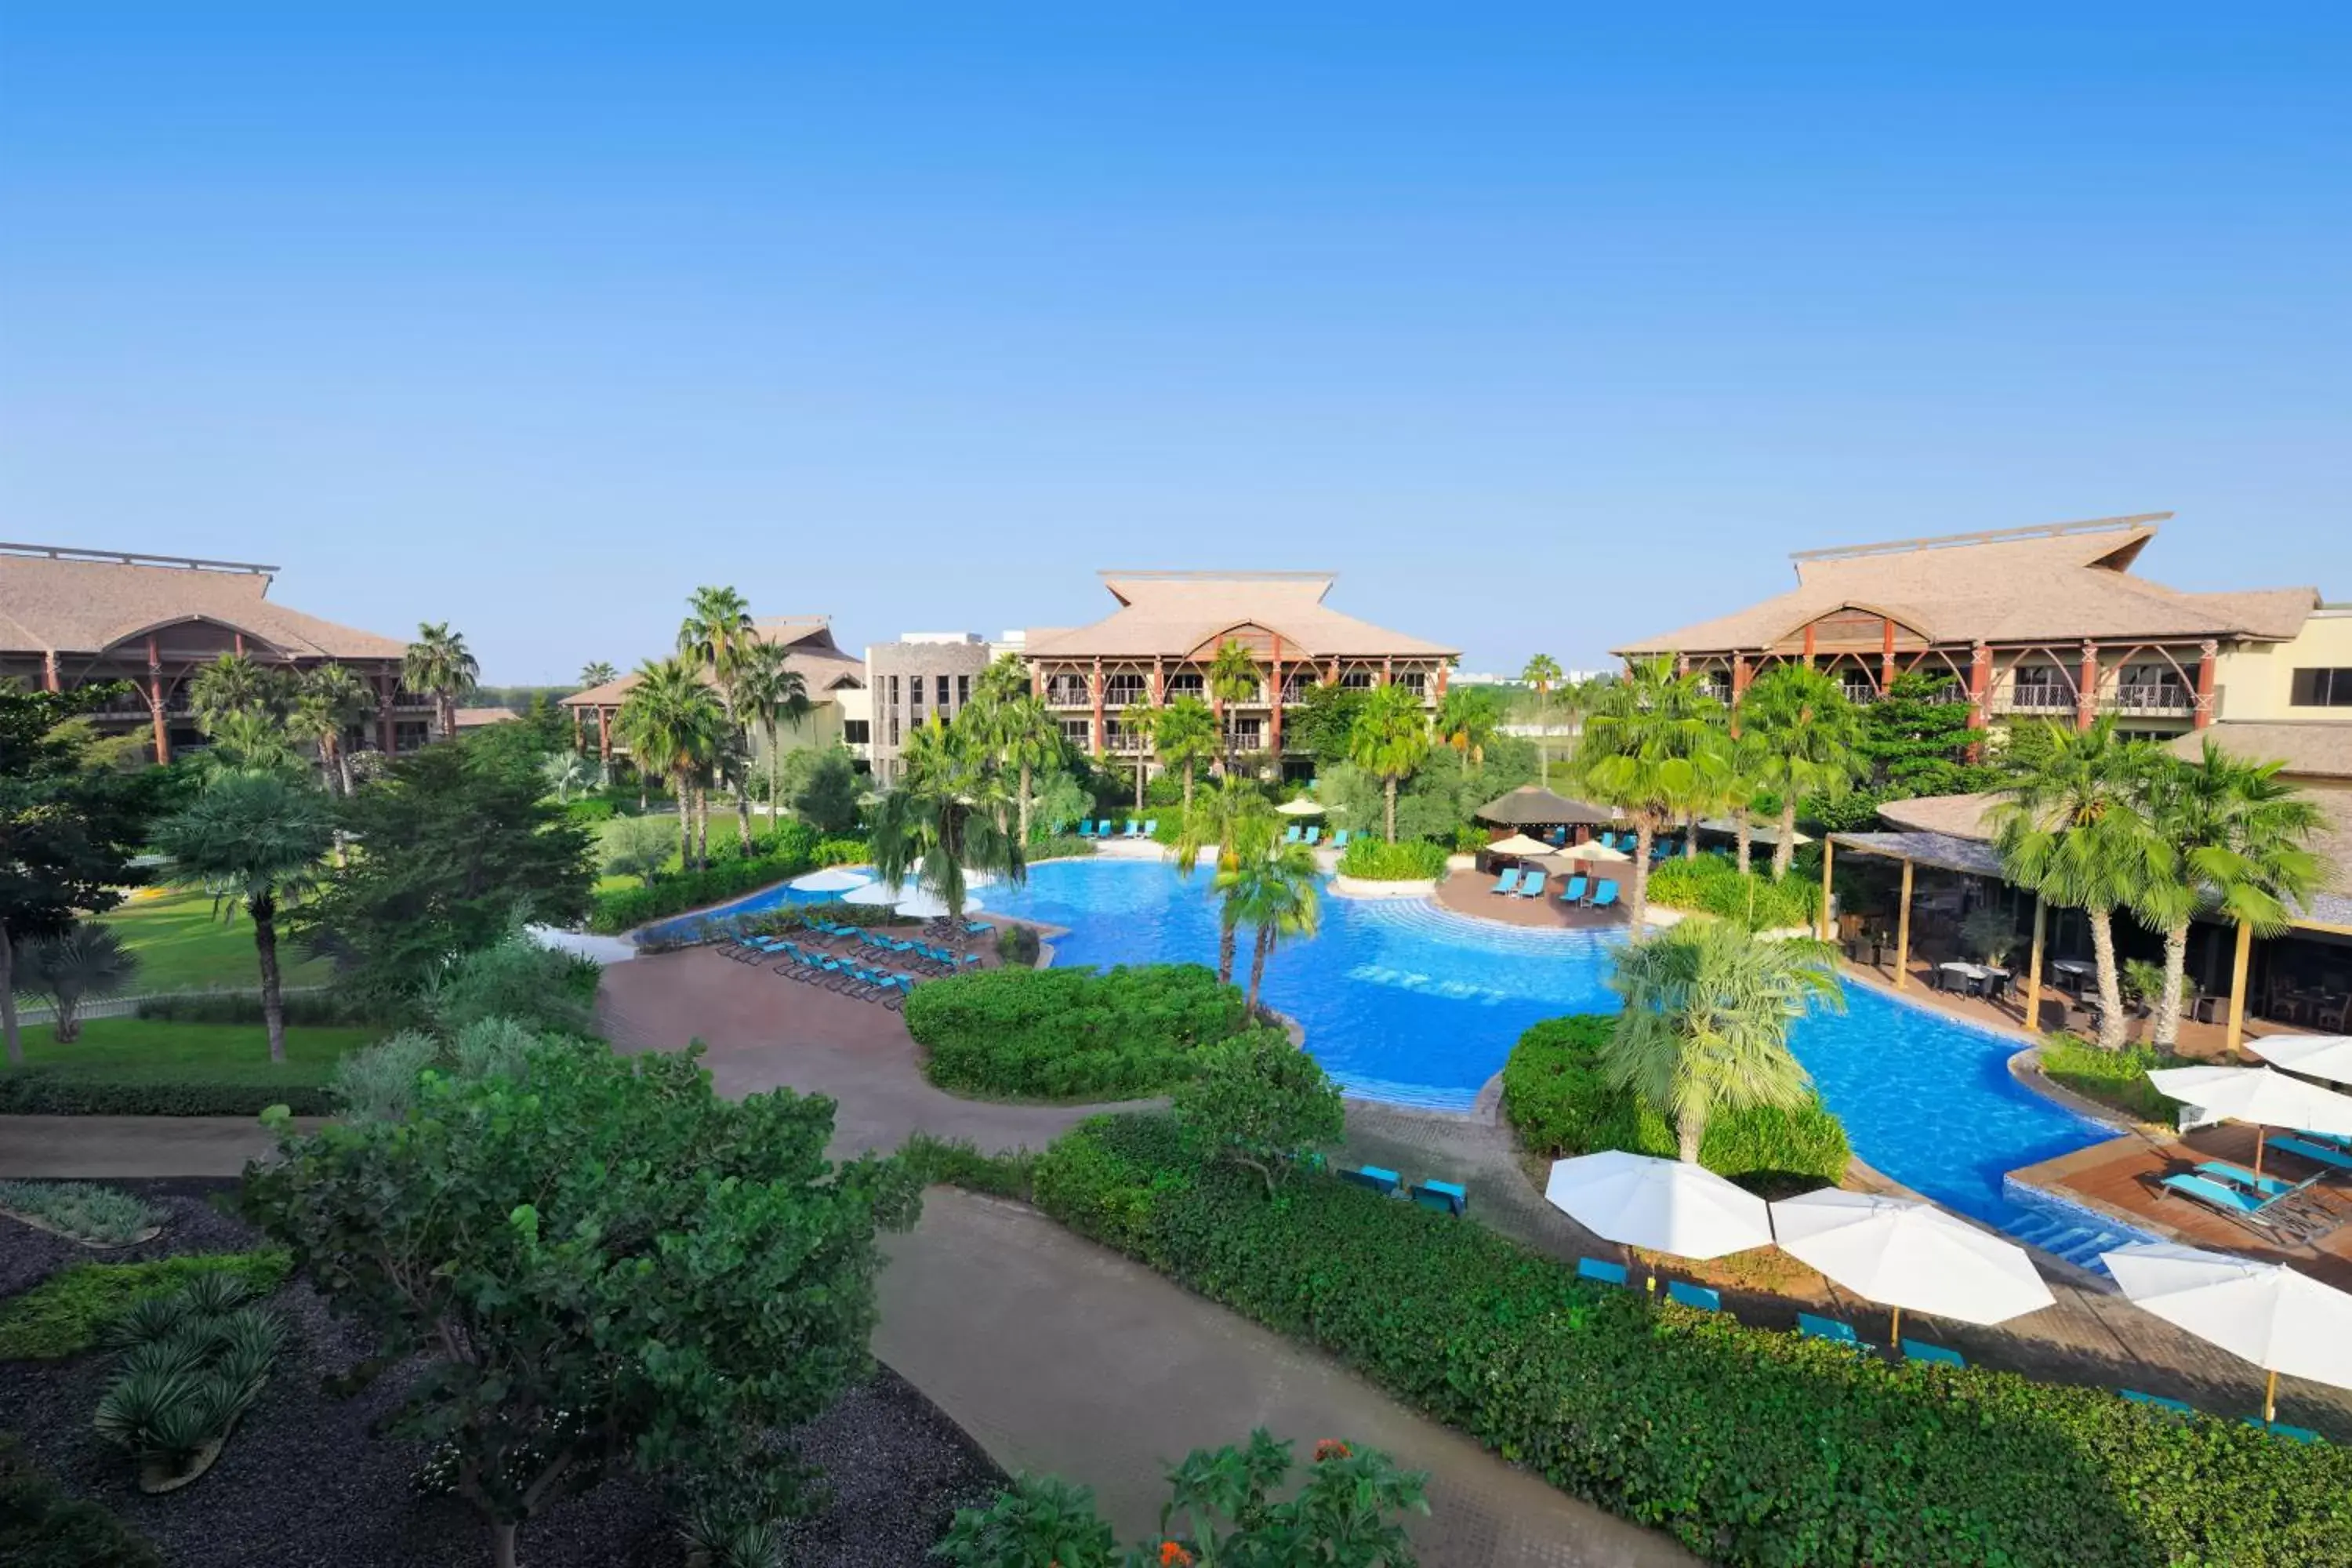 Property building, Pool View in Lapita, Dubai Parks and Resorts, Autograph Collection